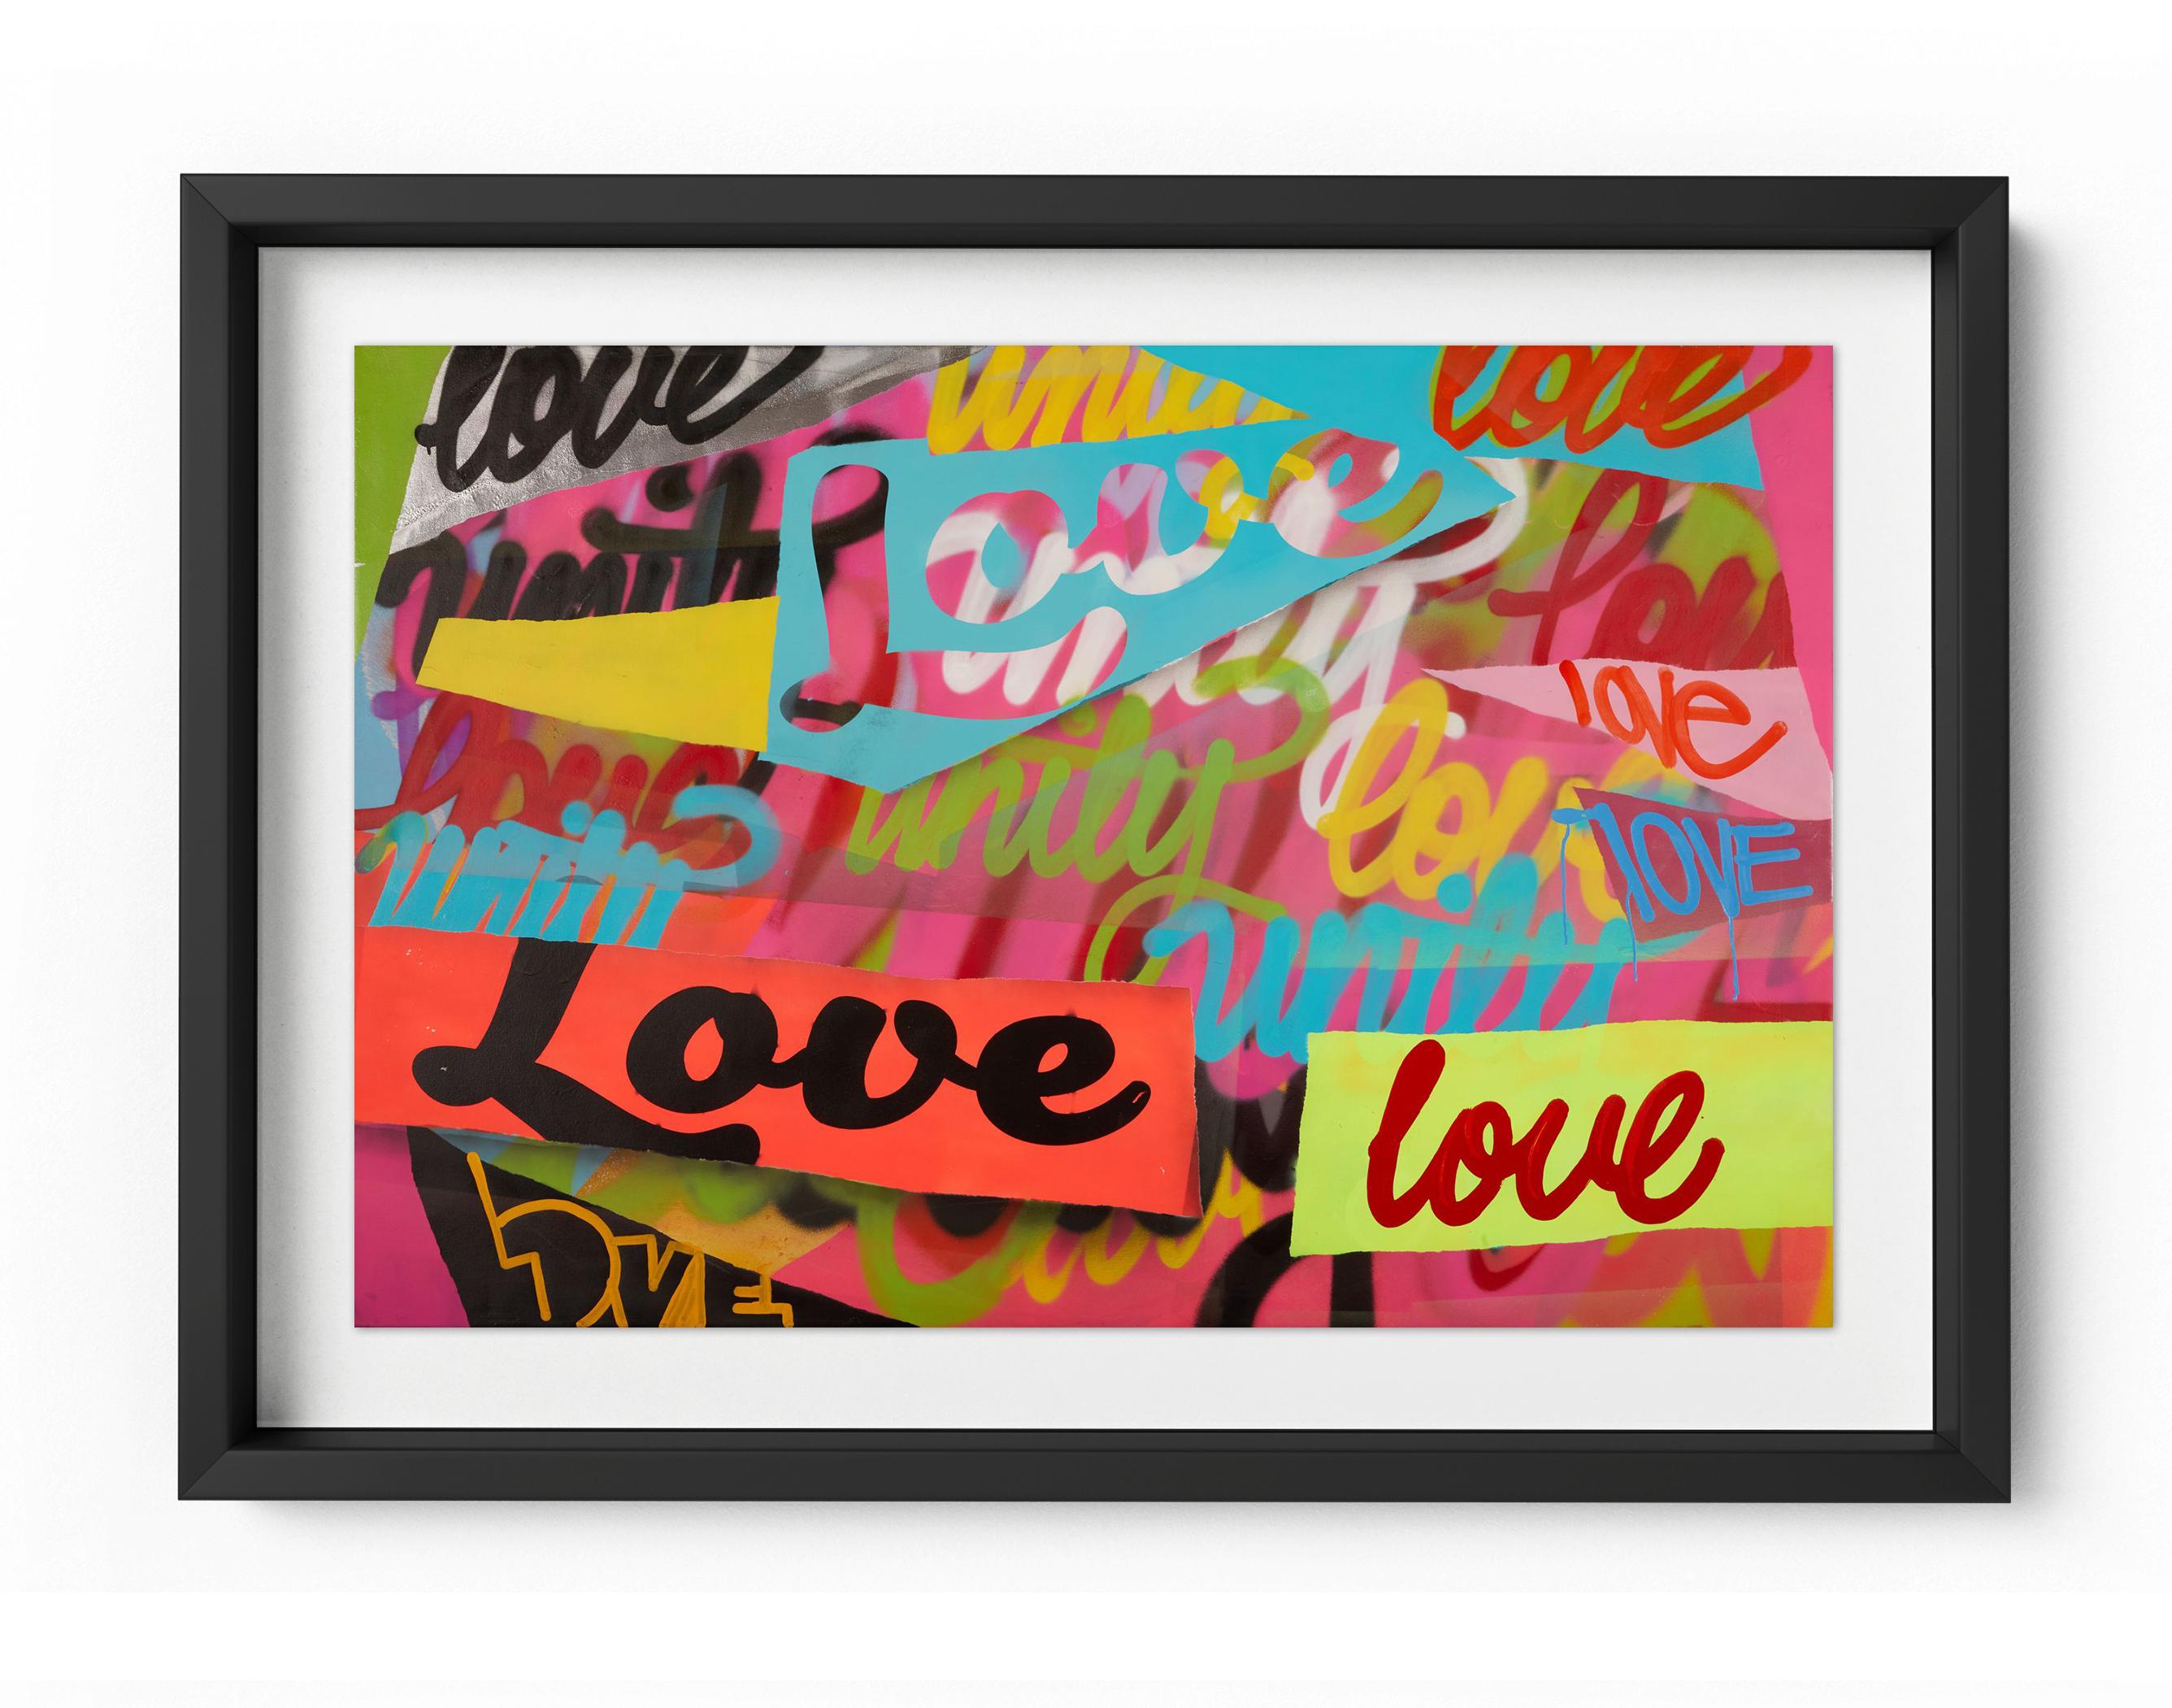 Unity & Love - Framed Limited Edition Print - Contemporary - Graffiti Inspired